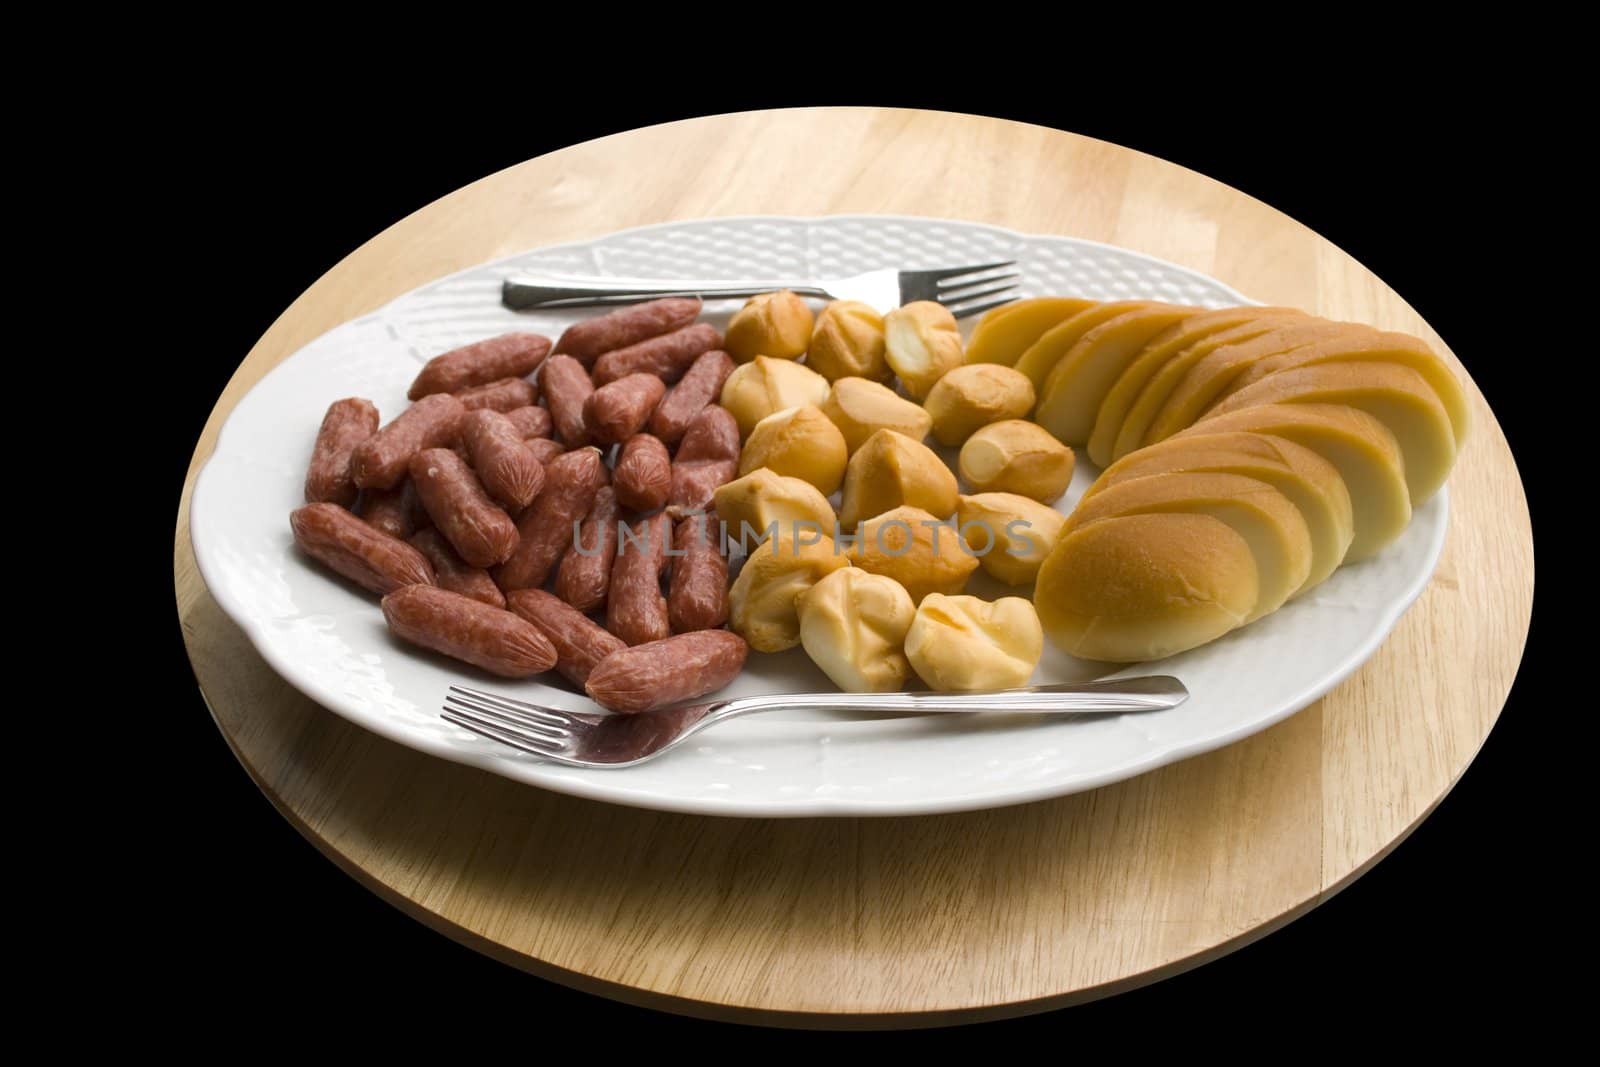 A plate of cheese and sausages - close up